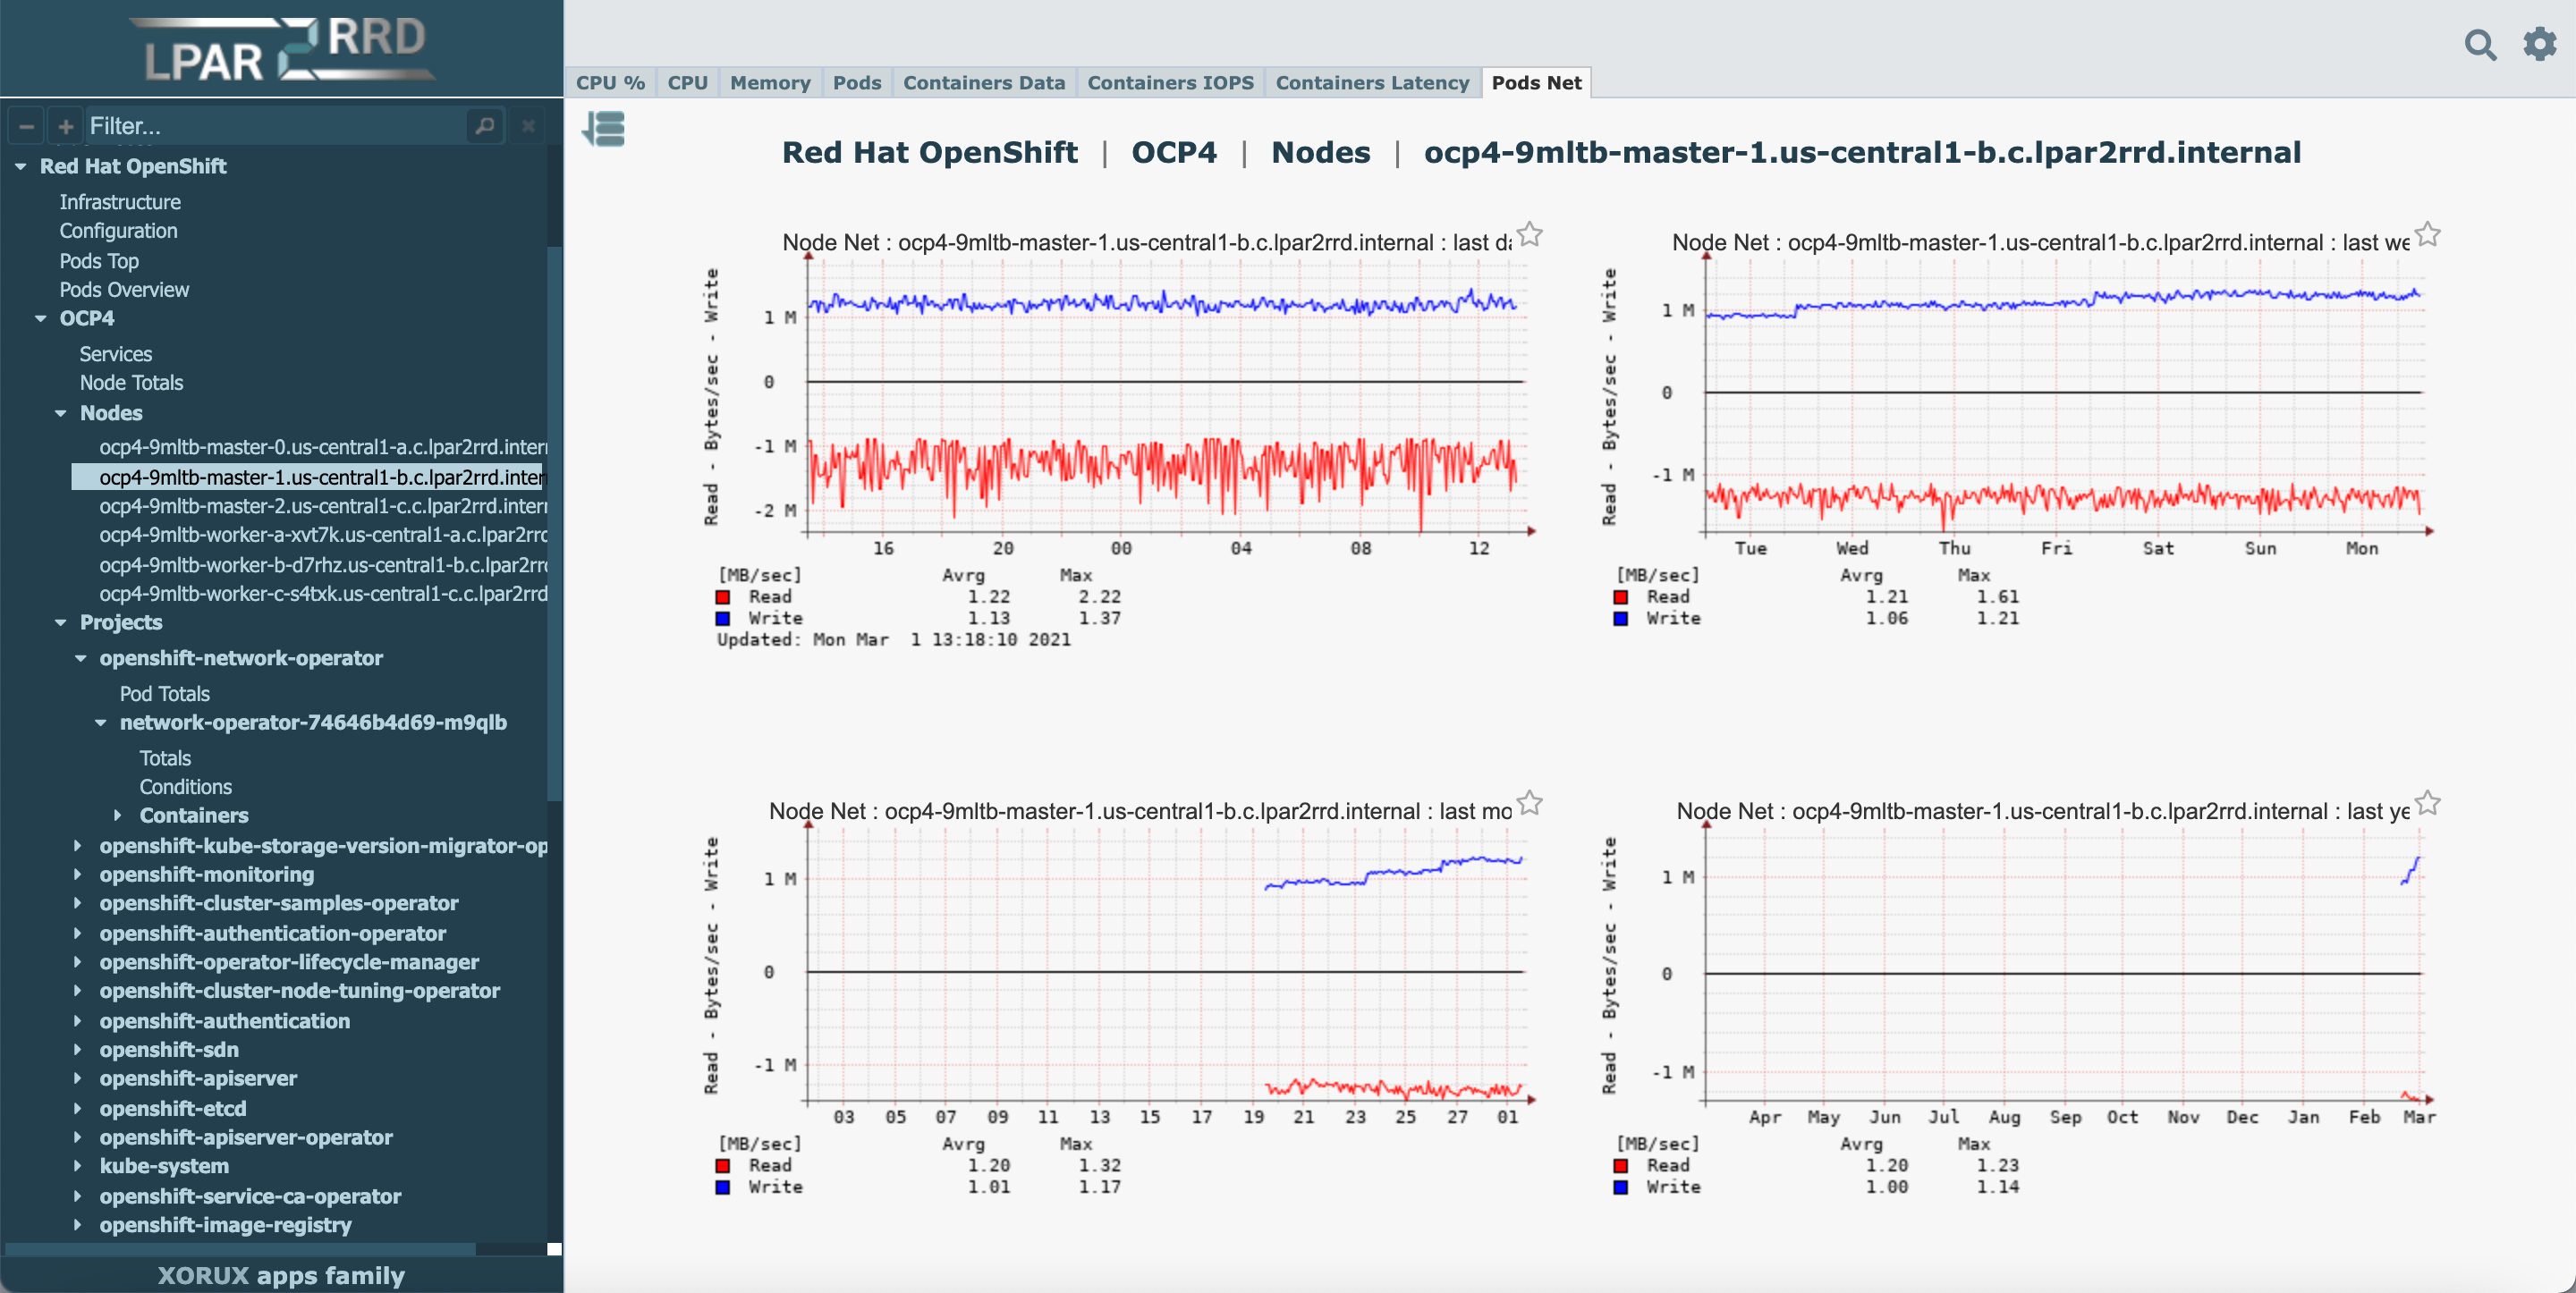 Openshift monitoring example